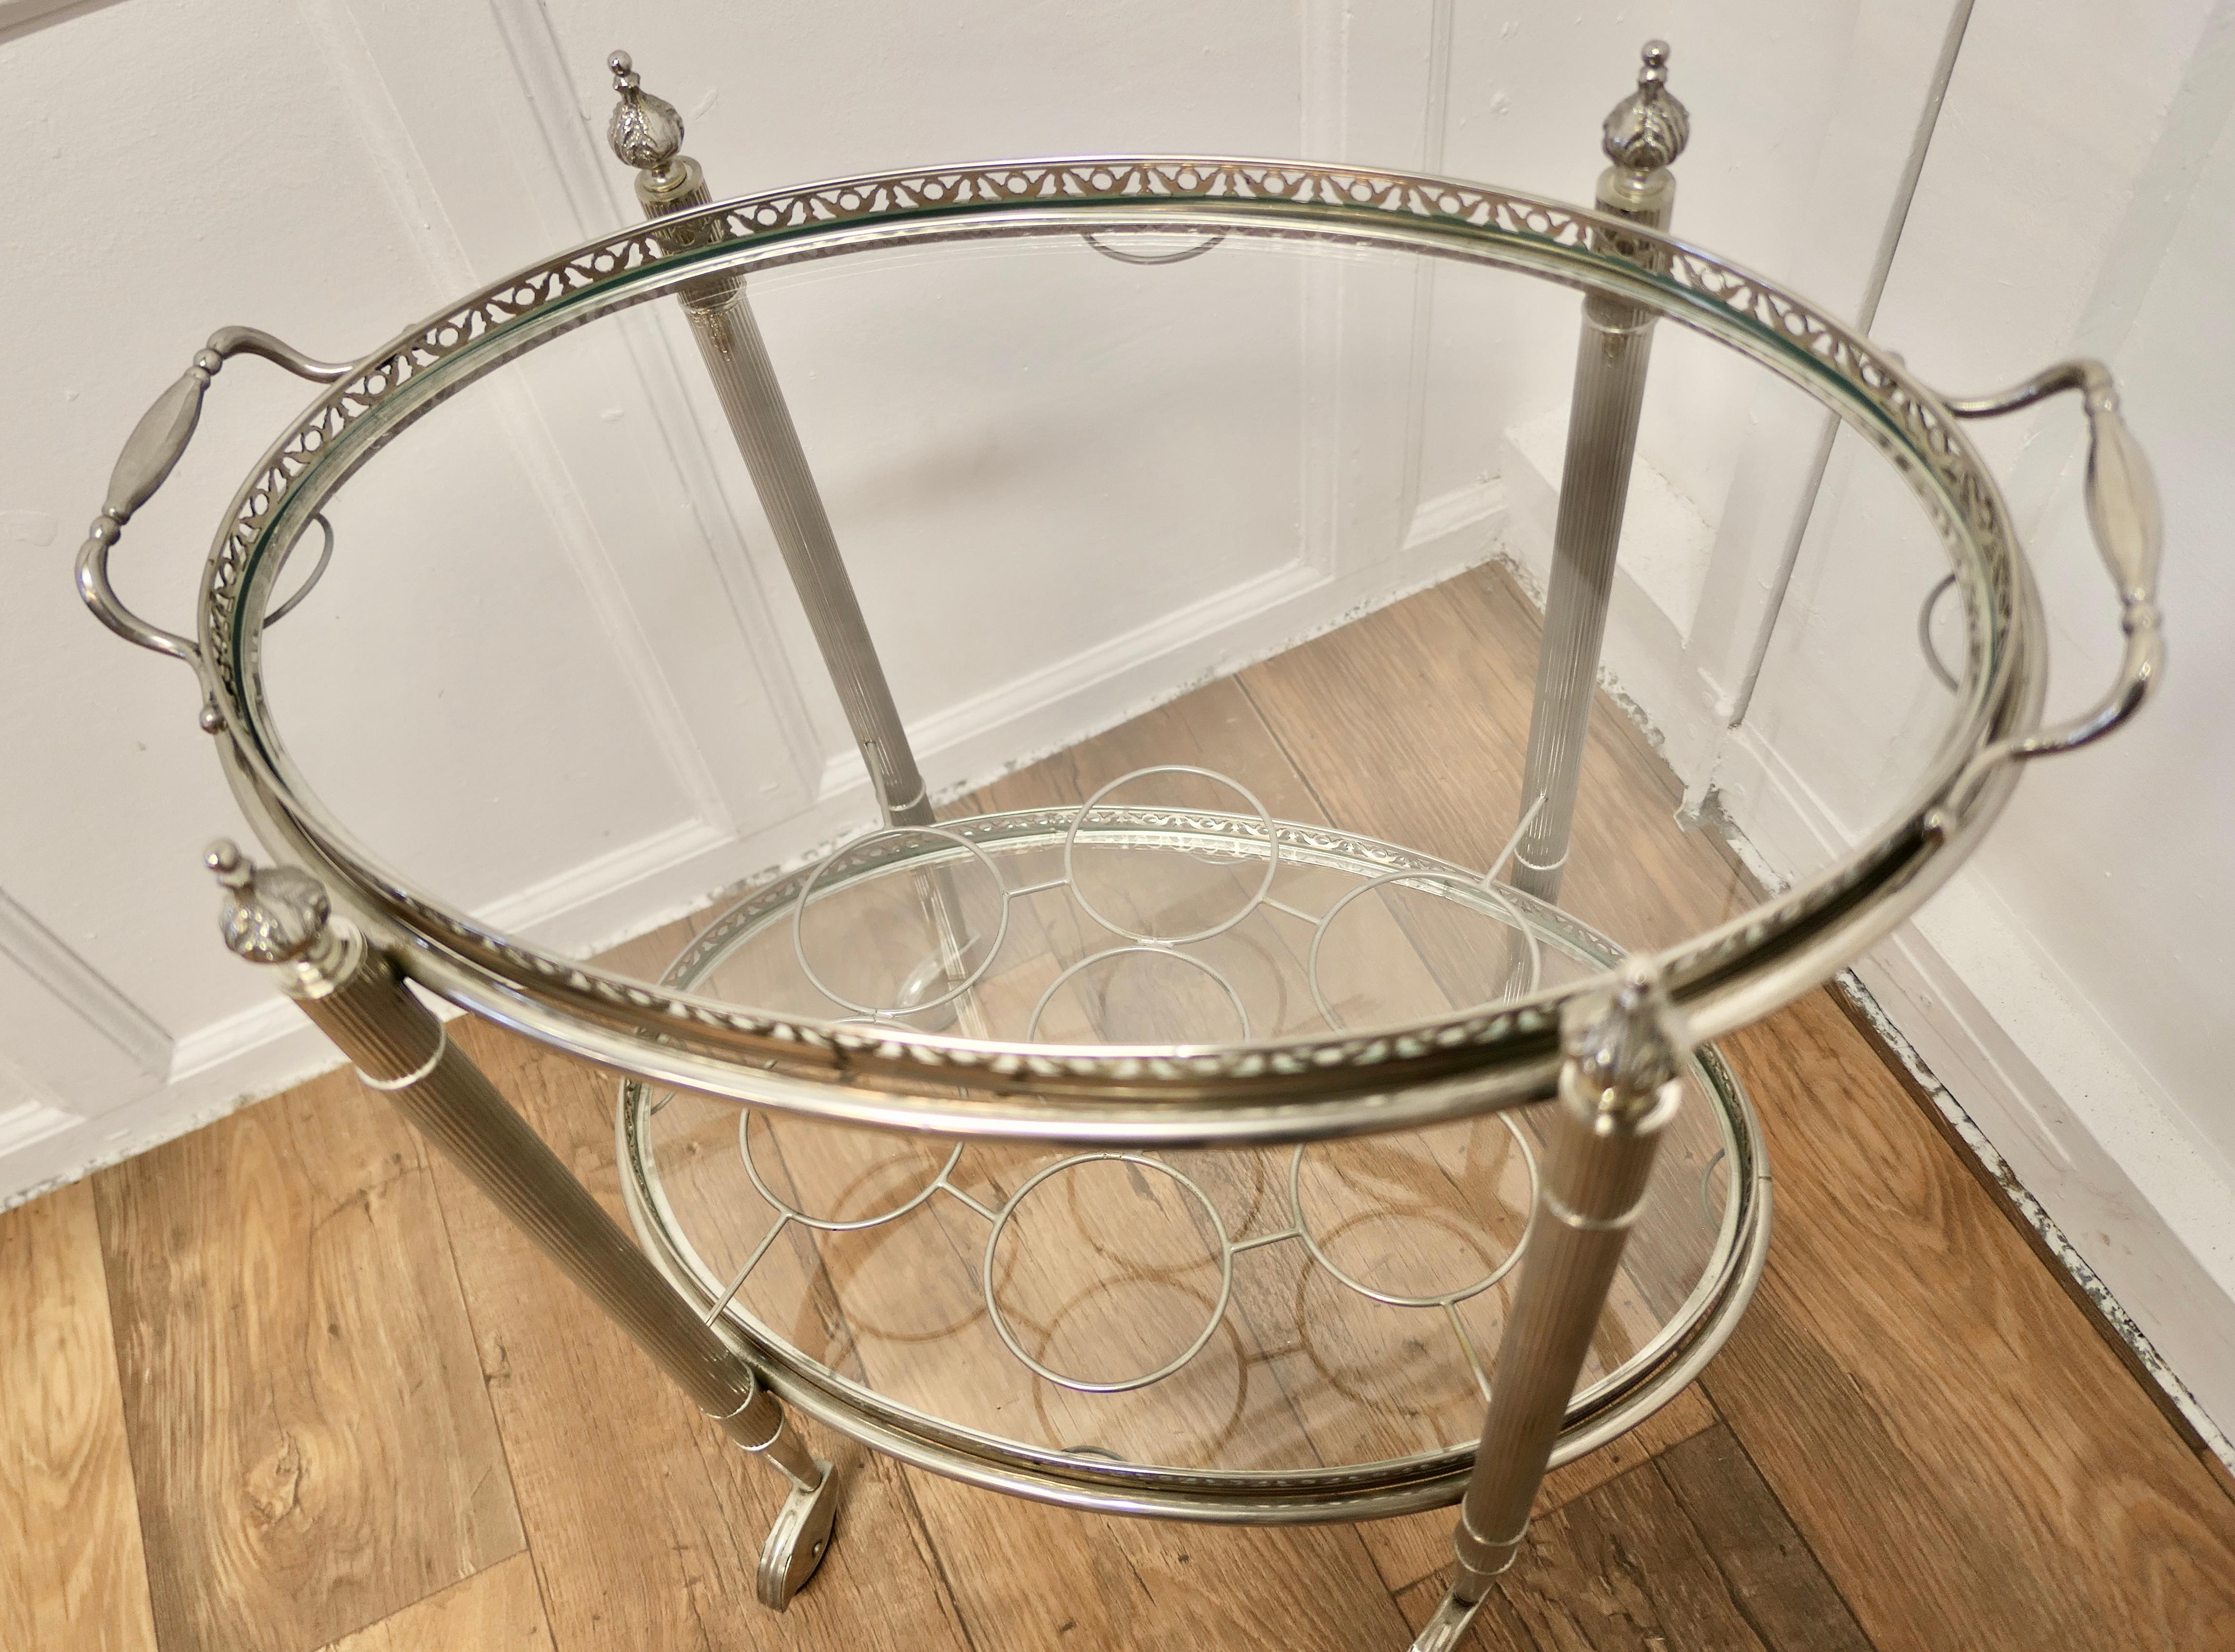 Mid-20th Century Vintage Art Deco Silver Drinks Trolley with Glass Tray a Very Decorative Piece